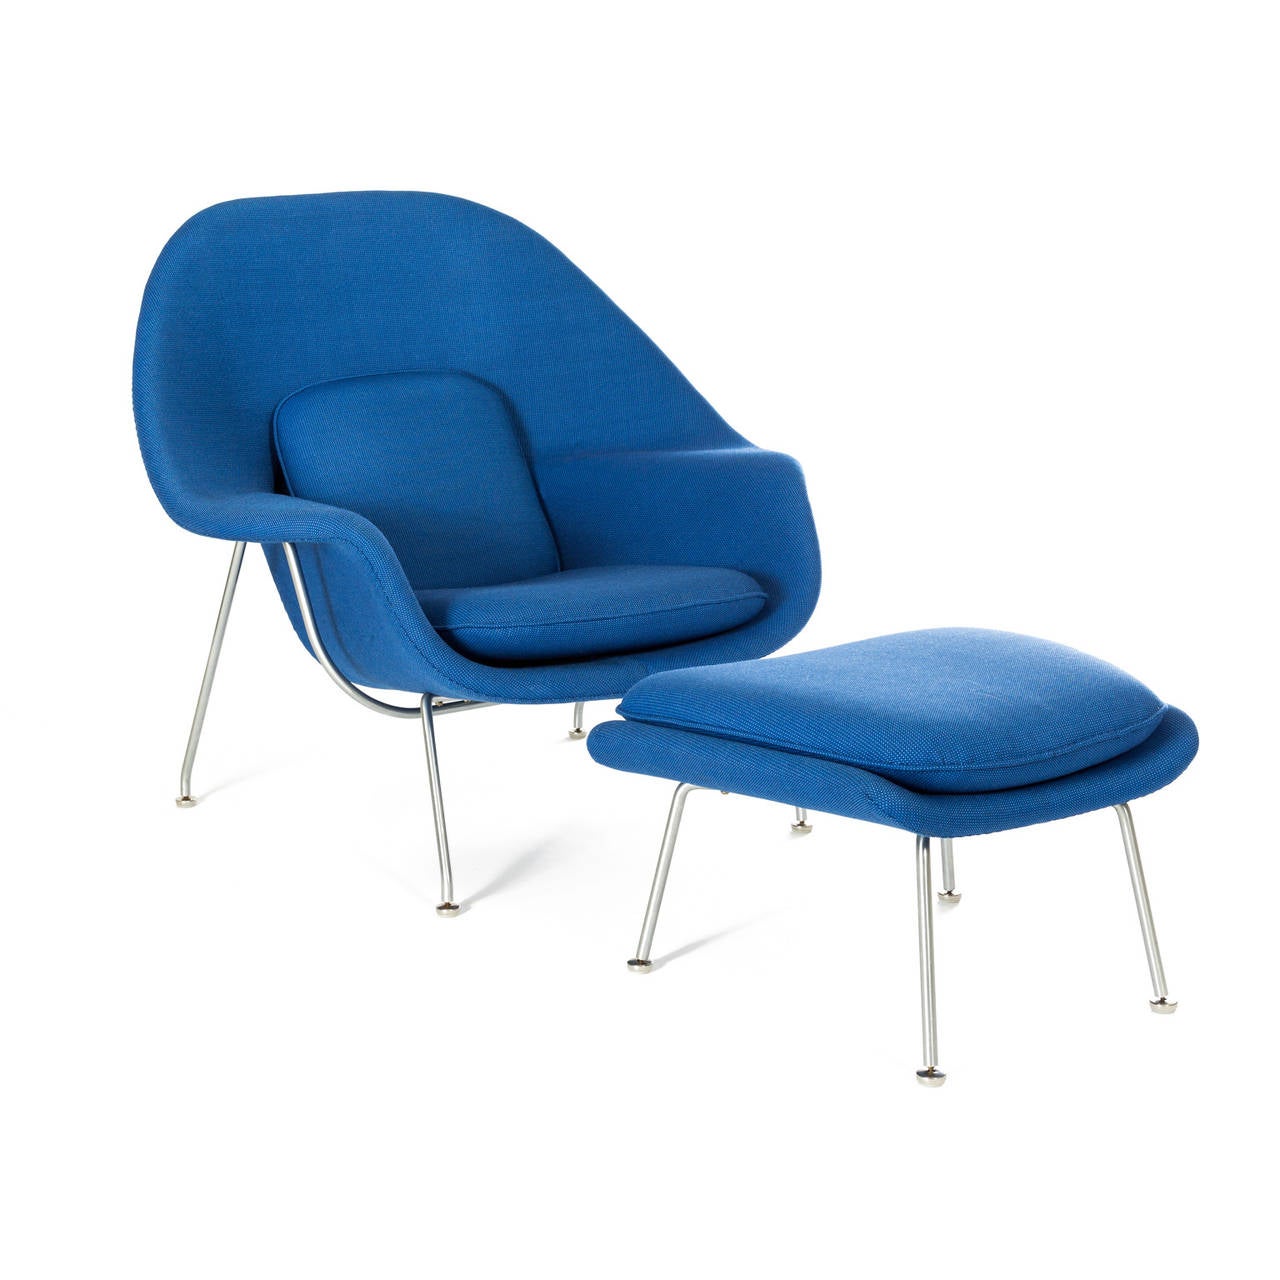 Eero Saarinen.

Womb chair and ottoman upholstered in Alexander Girard fabric.

Knoll.
USA, 1946.
Upholstery and plated steel.
39 w x 34 d x 36 h inches.